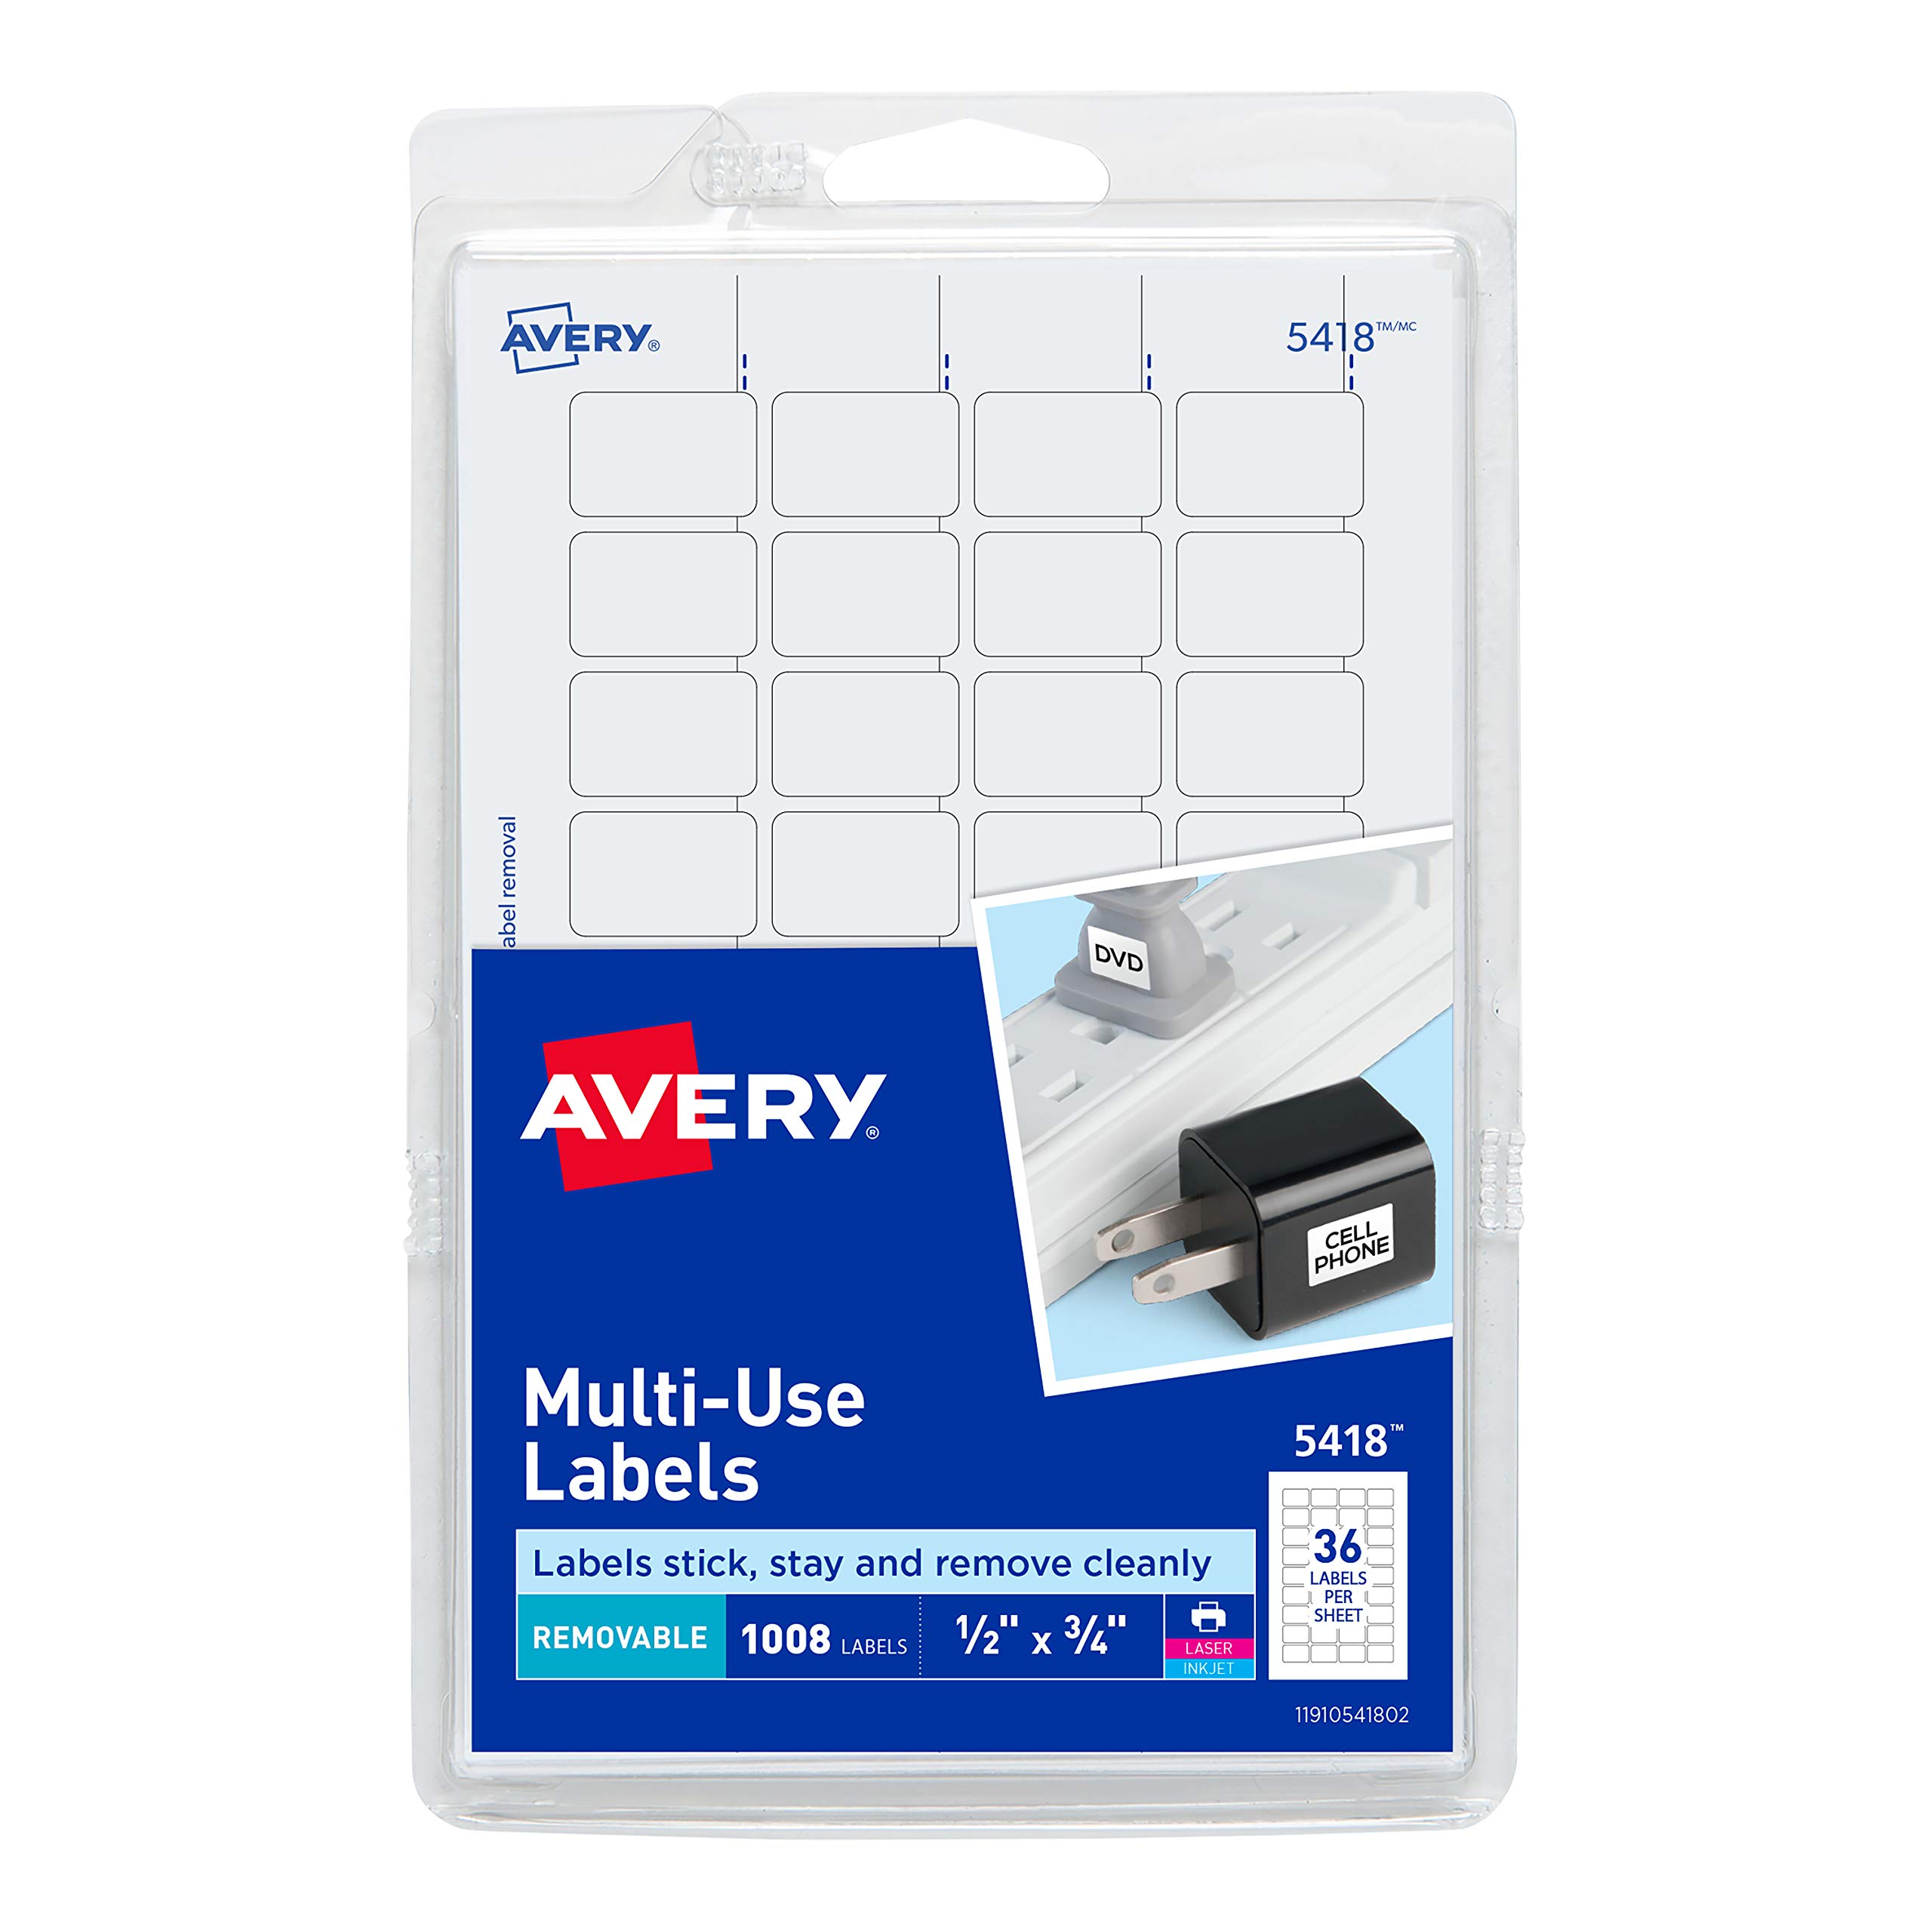 Avery Removable Print or Write Labels, White, 0.5 x 0.75 Inches, Pack of 1008 (5418)